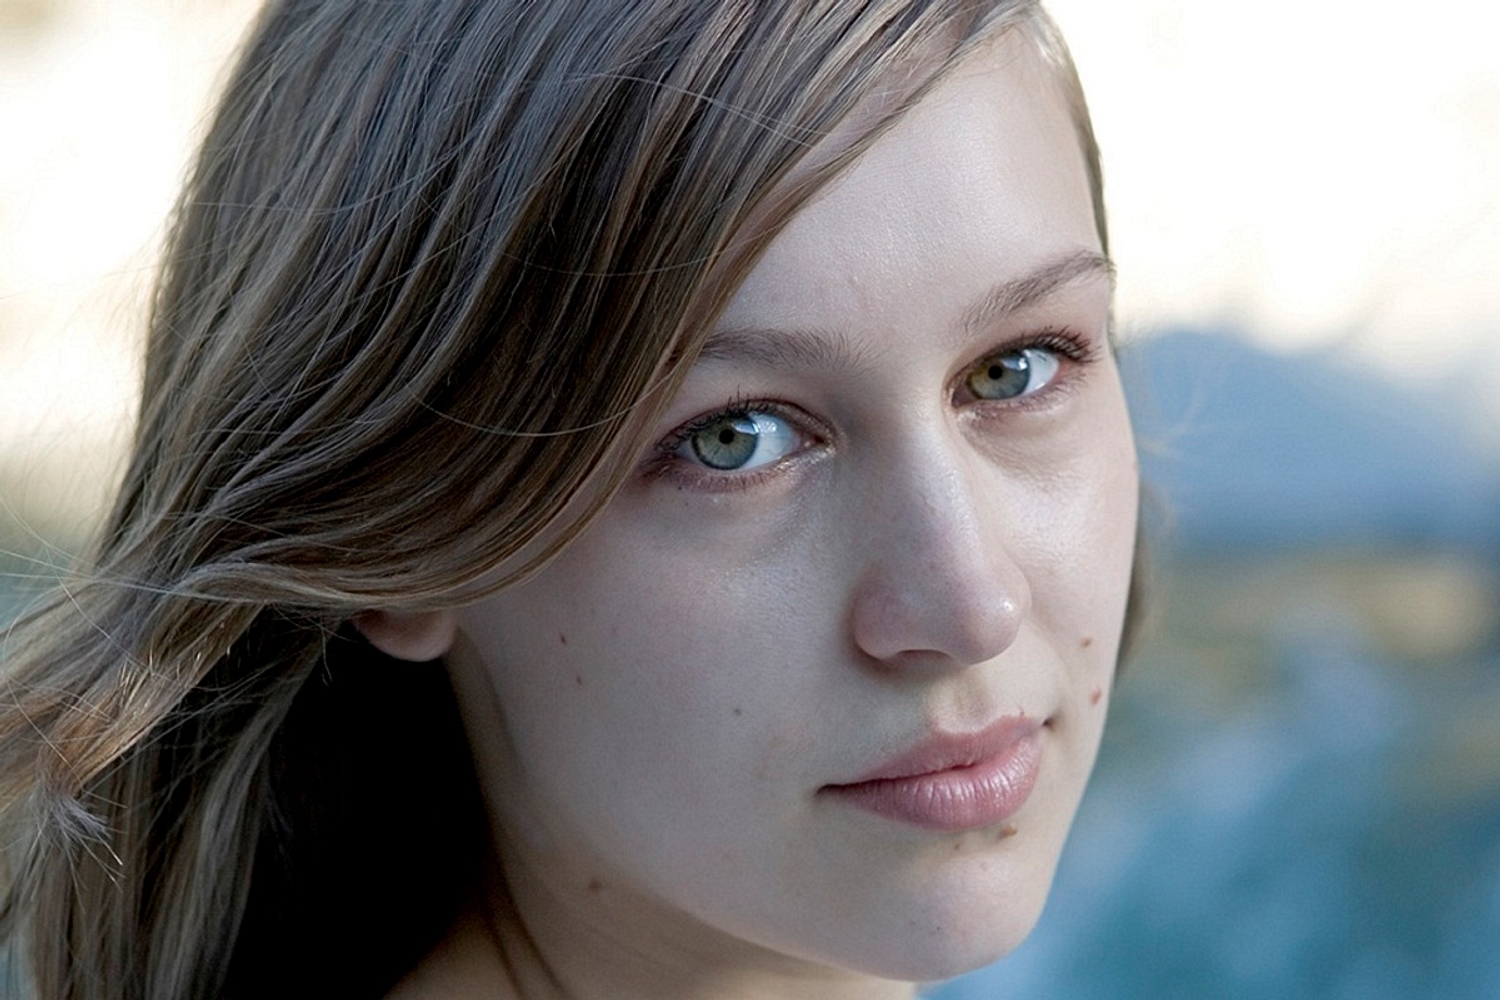 Joanna Newsom performs ‘Divers’ songs live for the first time